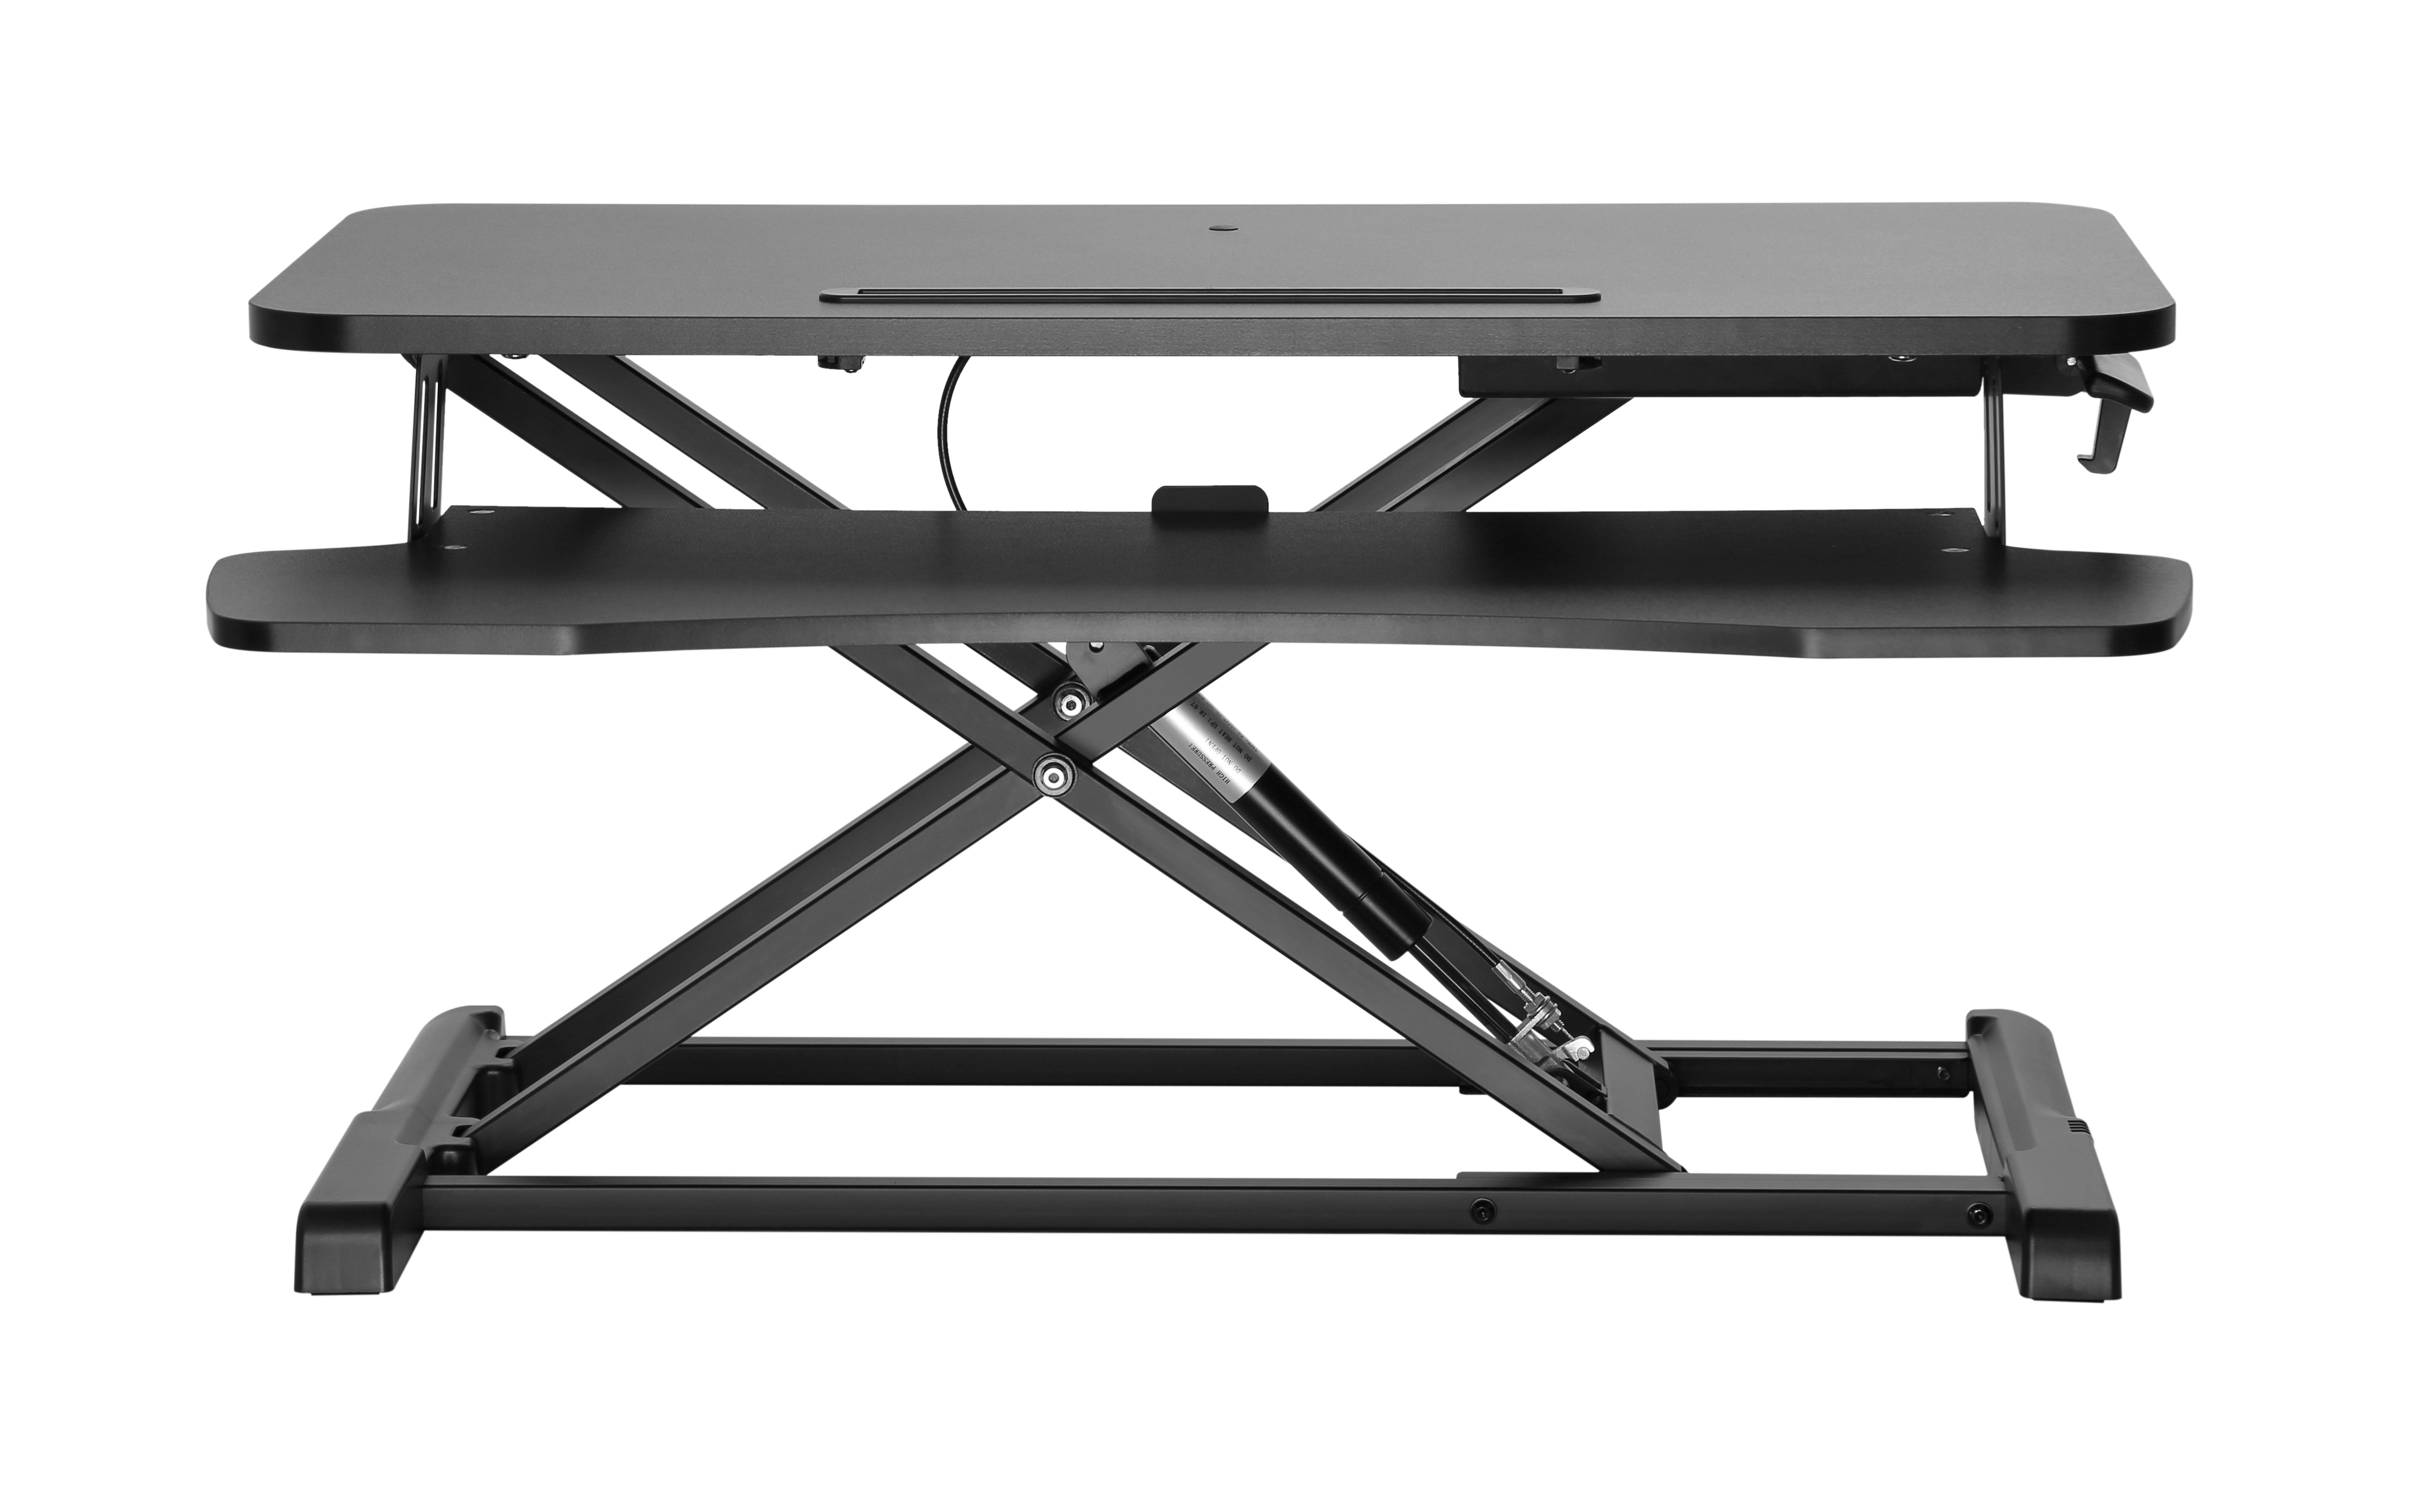 OCOMMO Standing Desk, Height Adjustable Desk Riser for Home Office or Office Desk, 31.5 Inch Computer Desk Workstation, Dual Monitor Stand and Laptop Stand with Ergonomic Keyboard Tray, Black